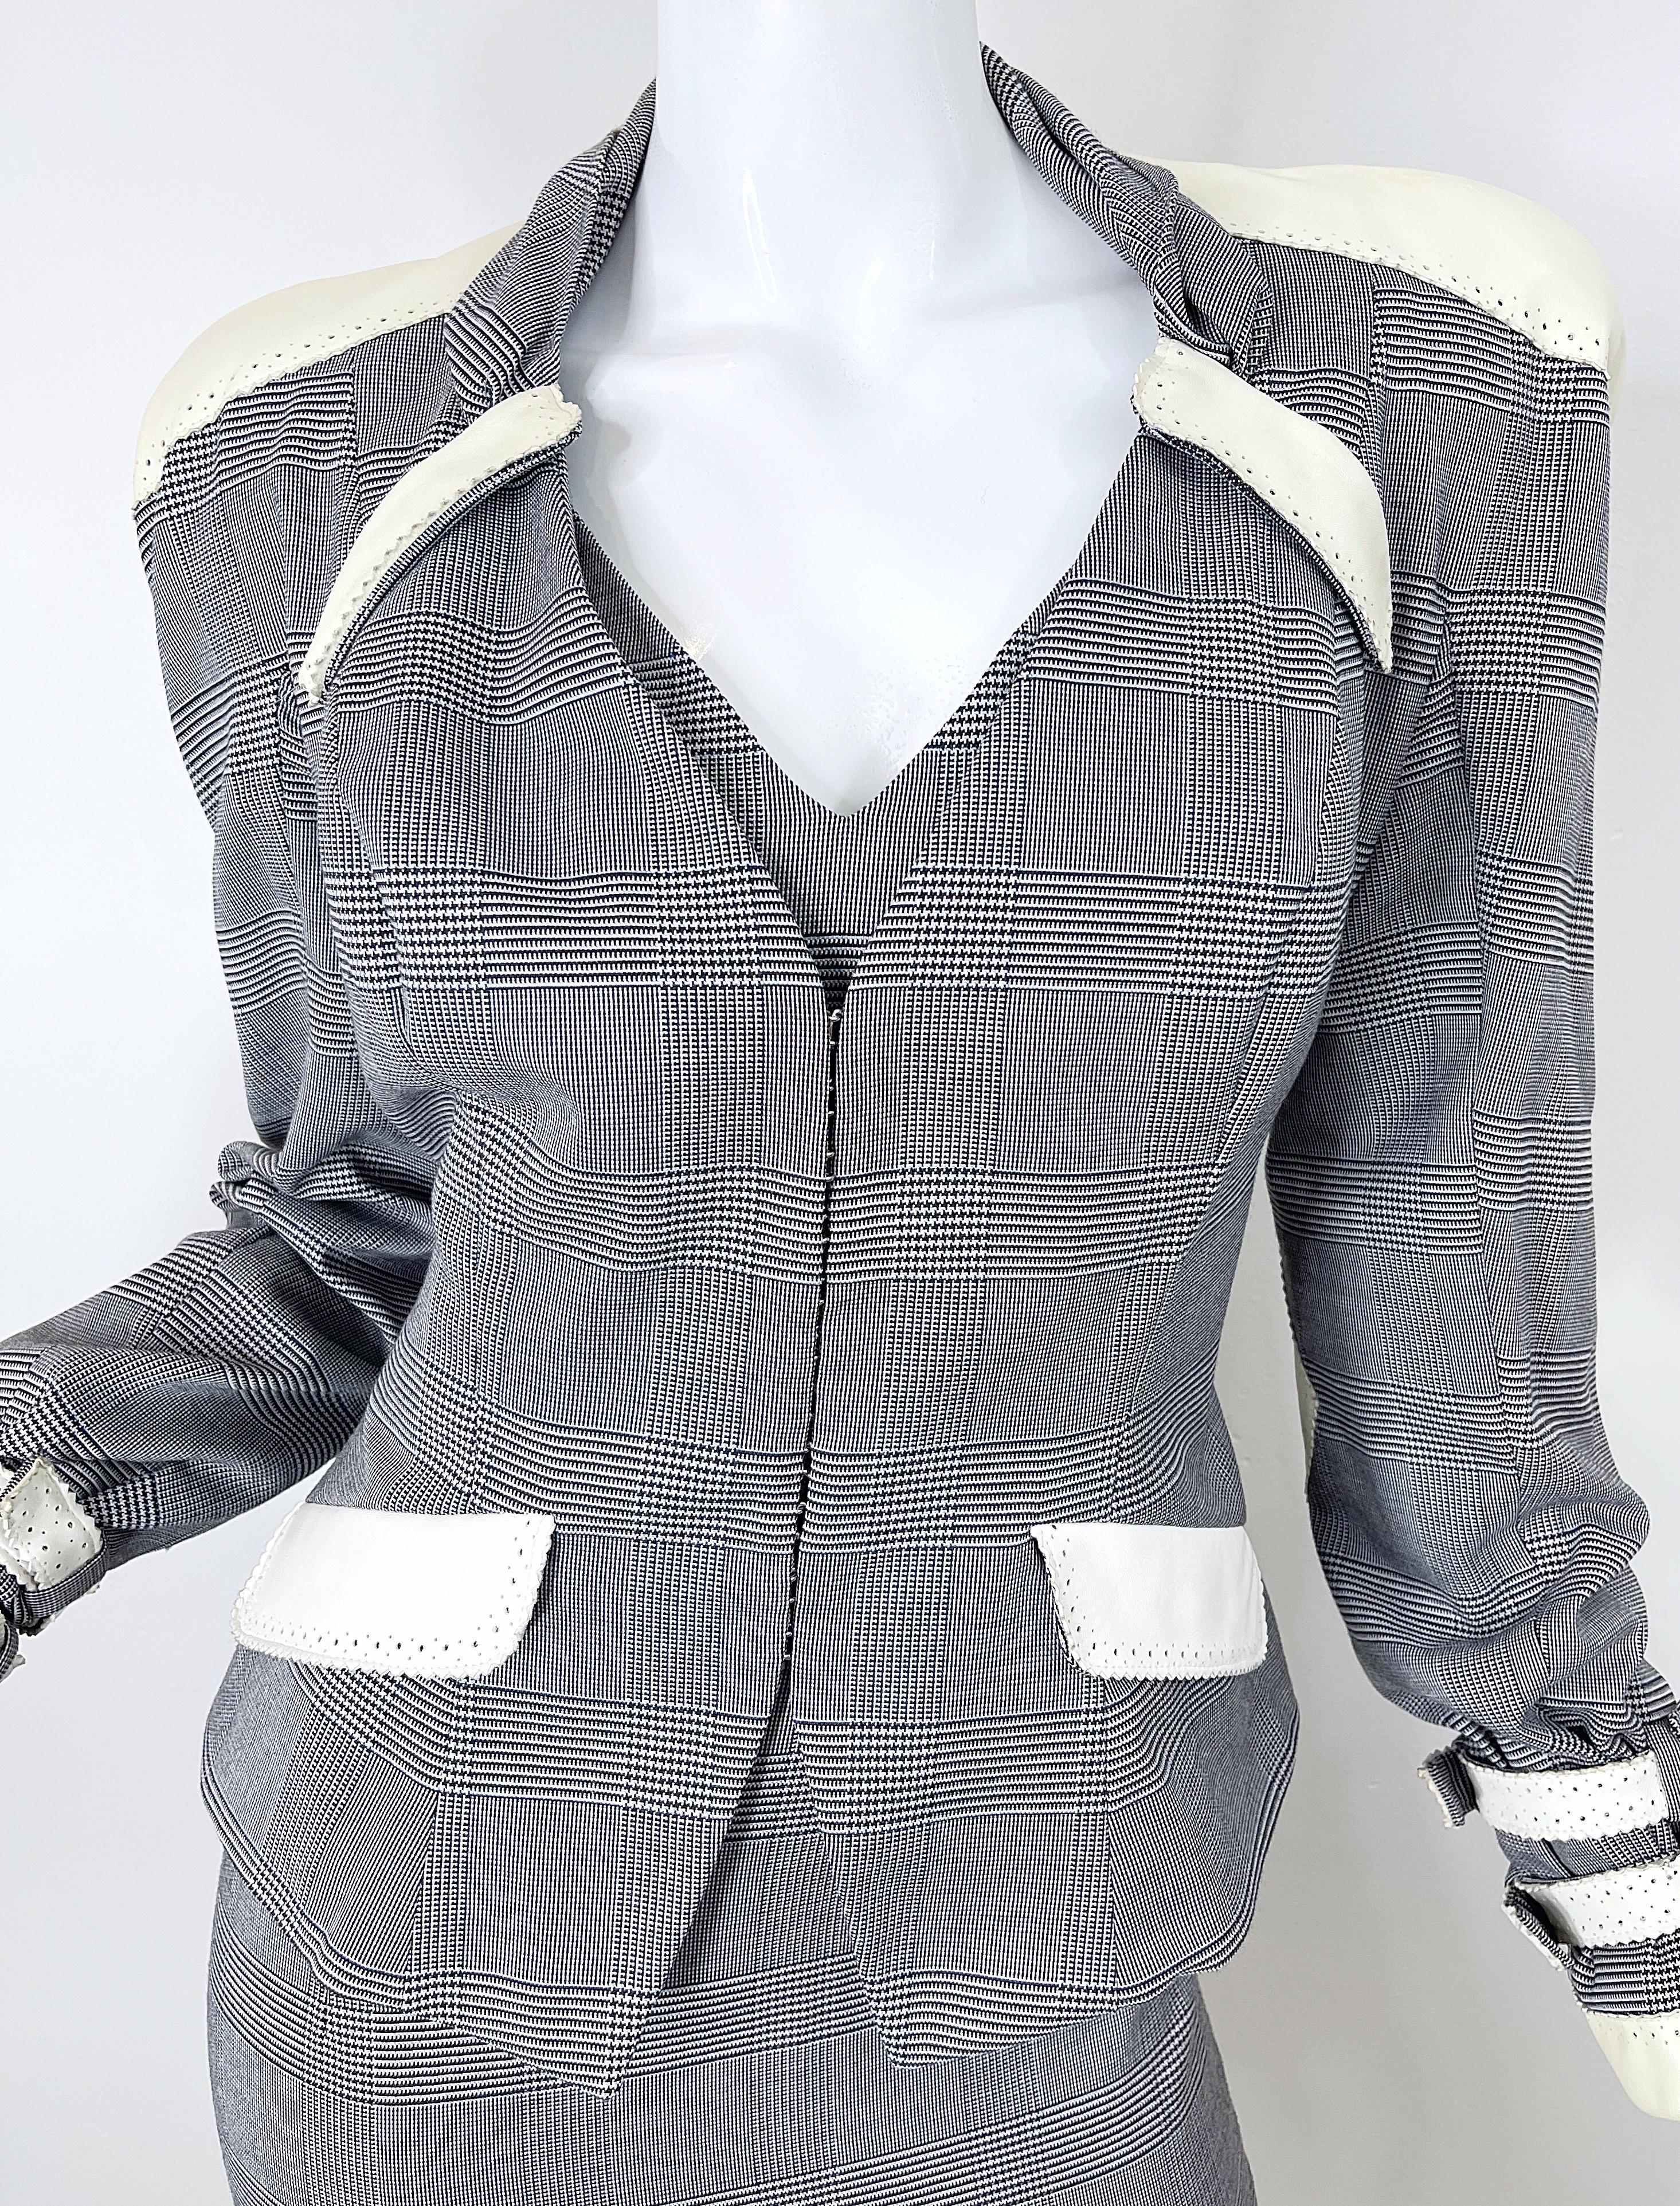 Christian Dior John Galliano Spring 2004 Runway Size 8 Black White Dress Jacket  In Excellent Condition For Sale In San Diego, CA